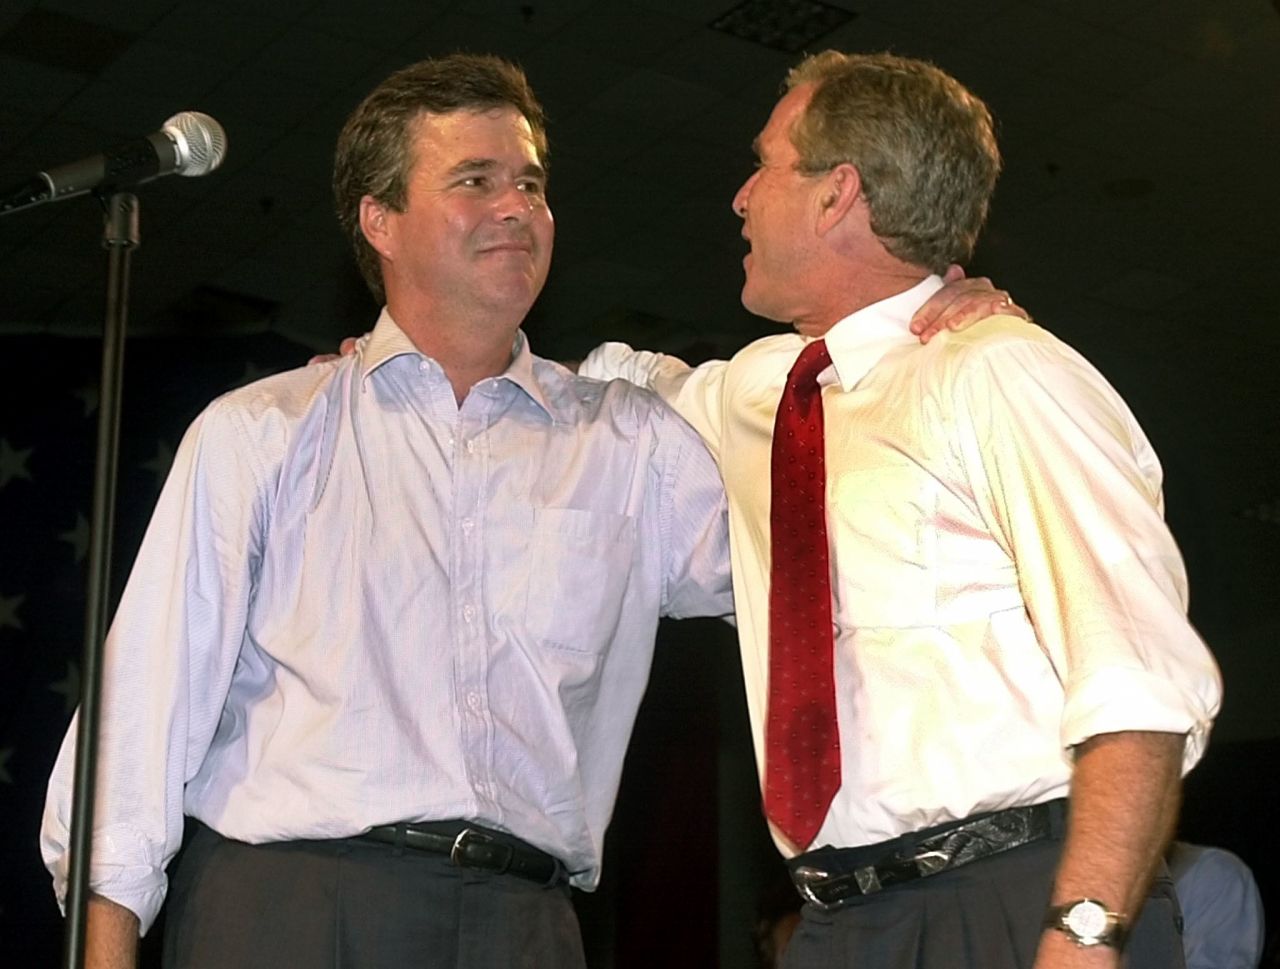 Jeb Bush (left) and then-President George W. Bush stand with their arms around each other's shoulders at a rally in Miami, Florida, September 22, 2000.